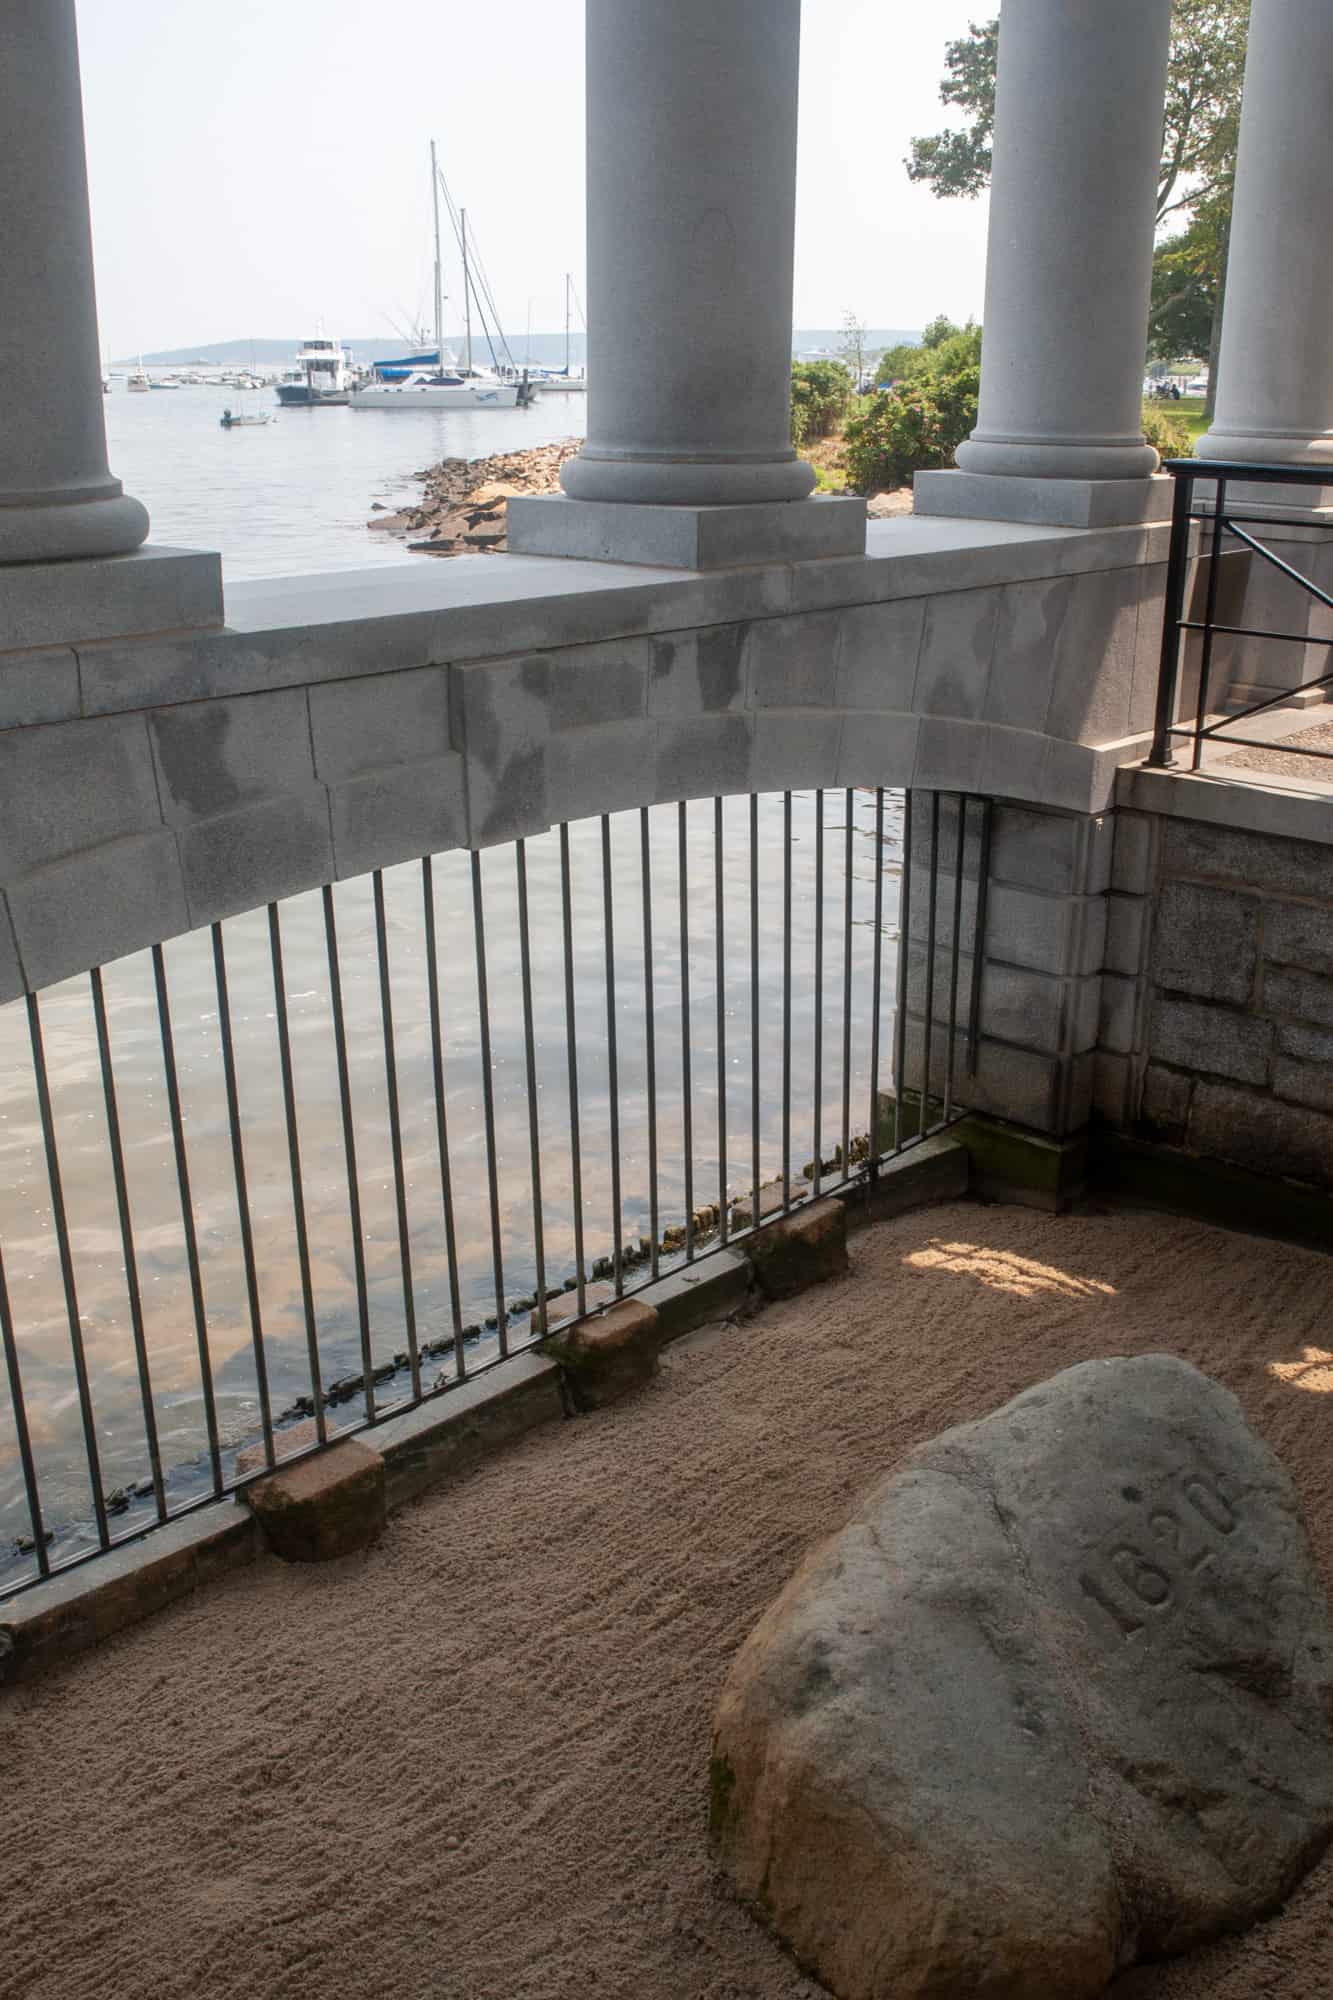 on a day trip to plymouth you have to stop by plymouth rock, seen under the granite canopy along the water's edge